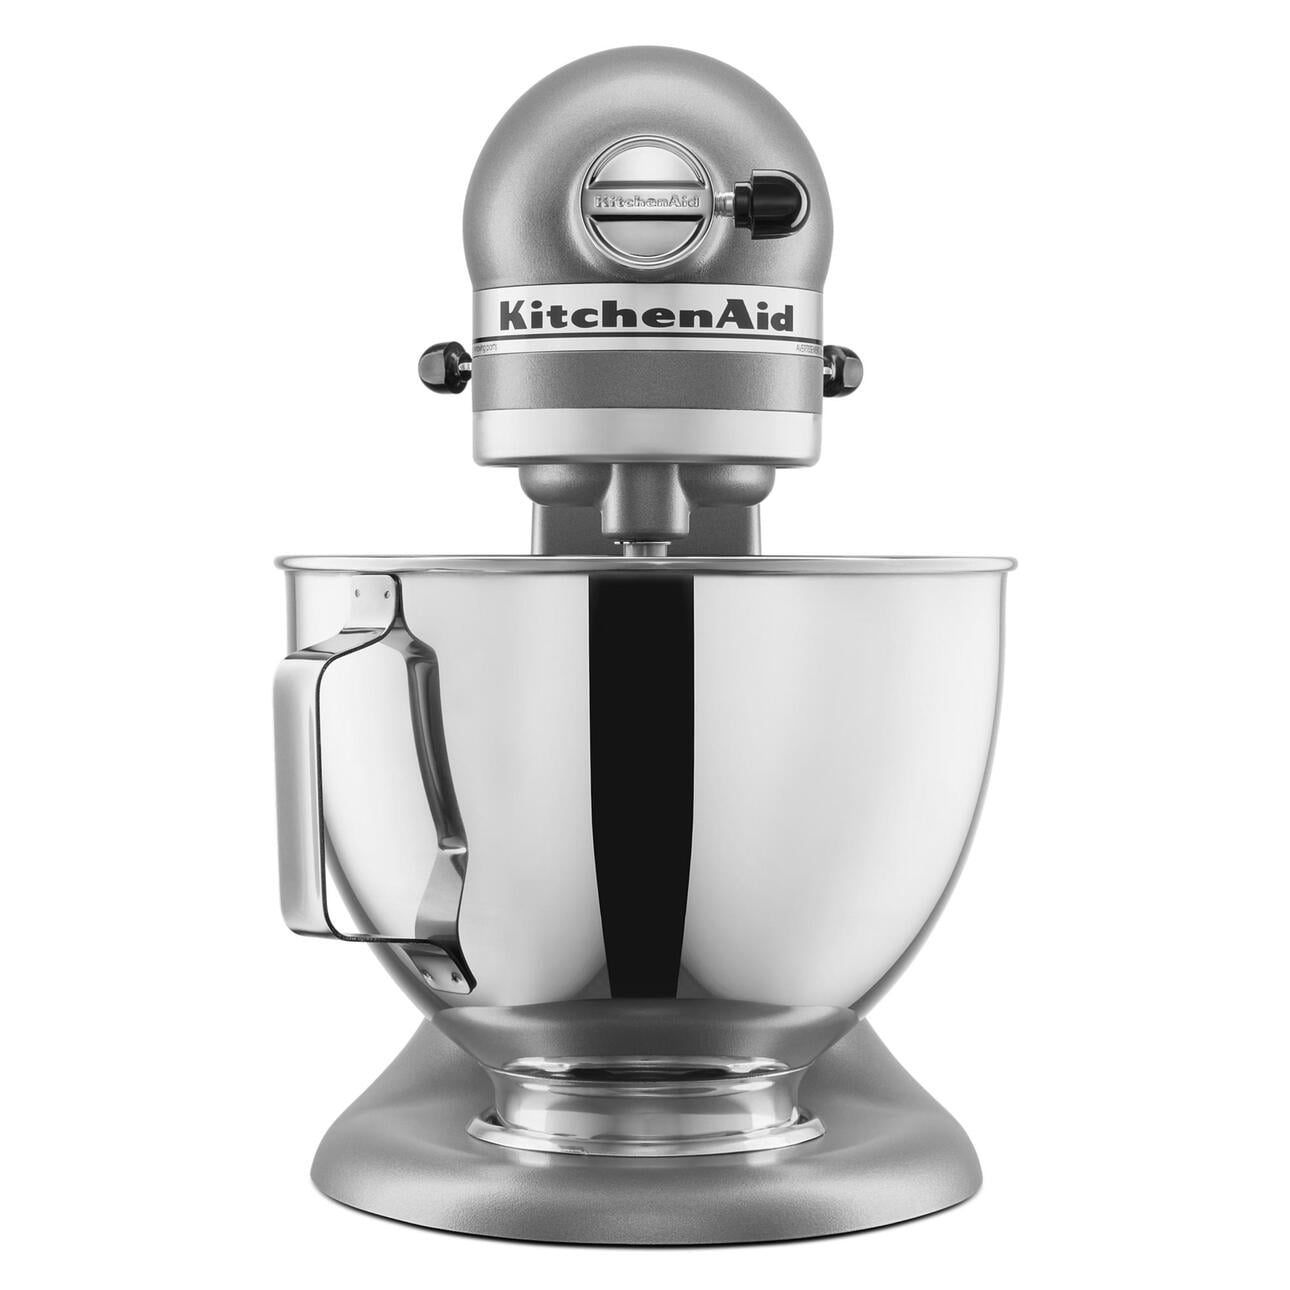 Forget the KitchenAid tax, GE's metal tilt-head stand mixer is $199 (  low, $100 off)